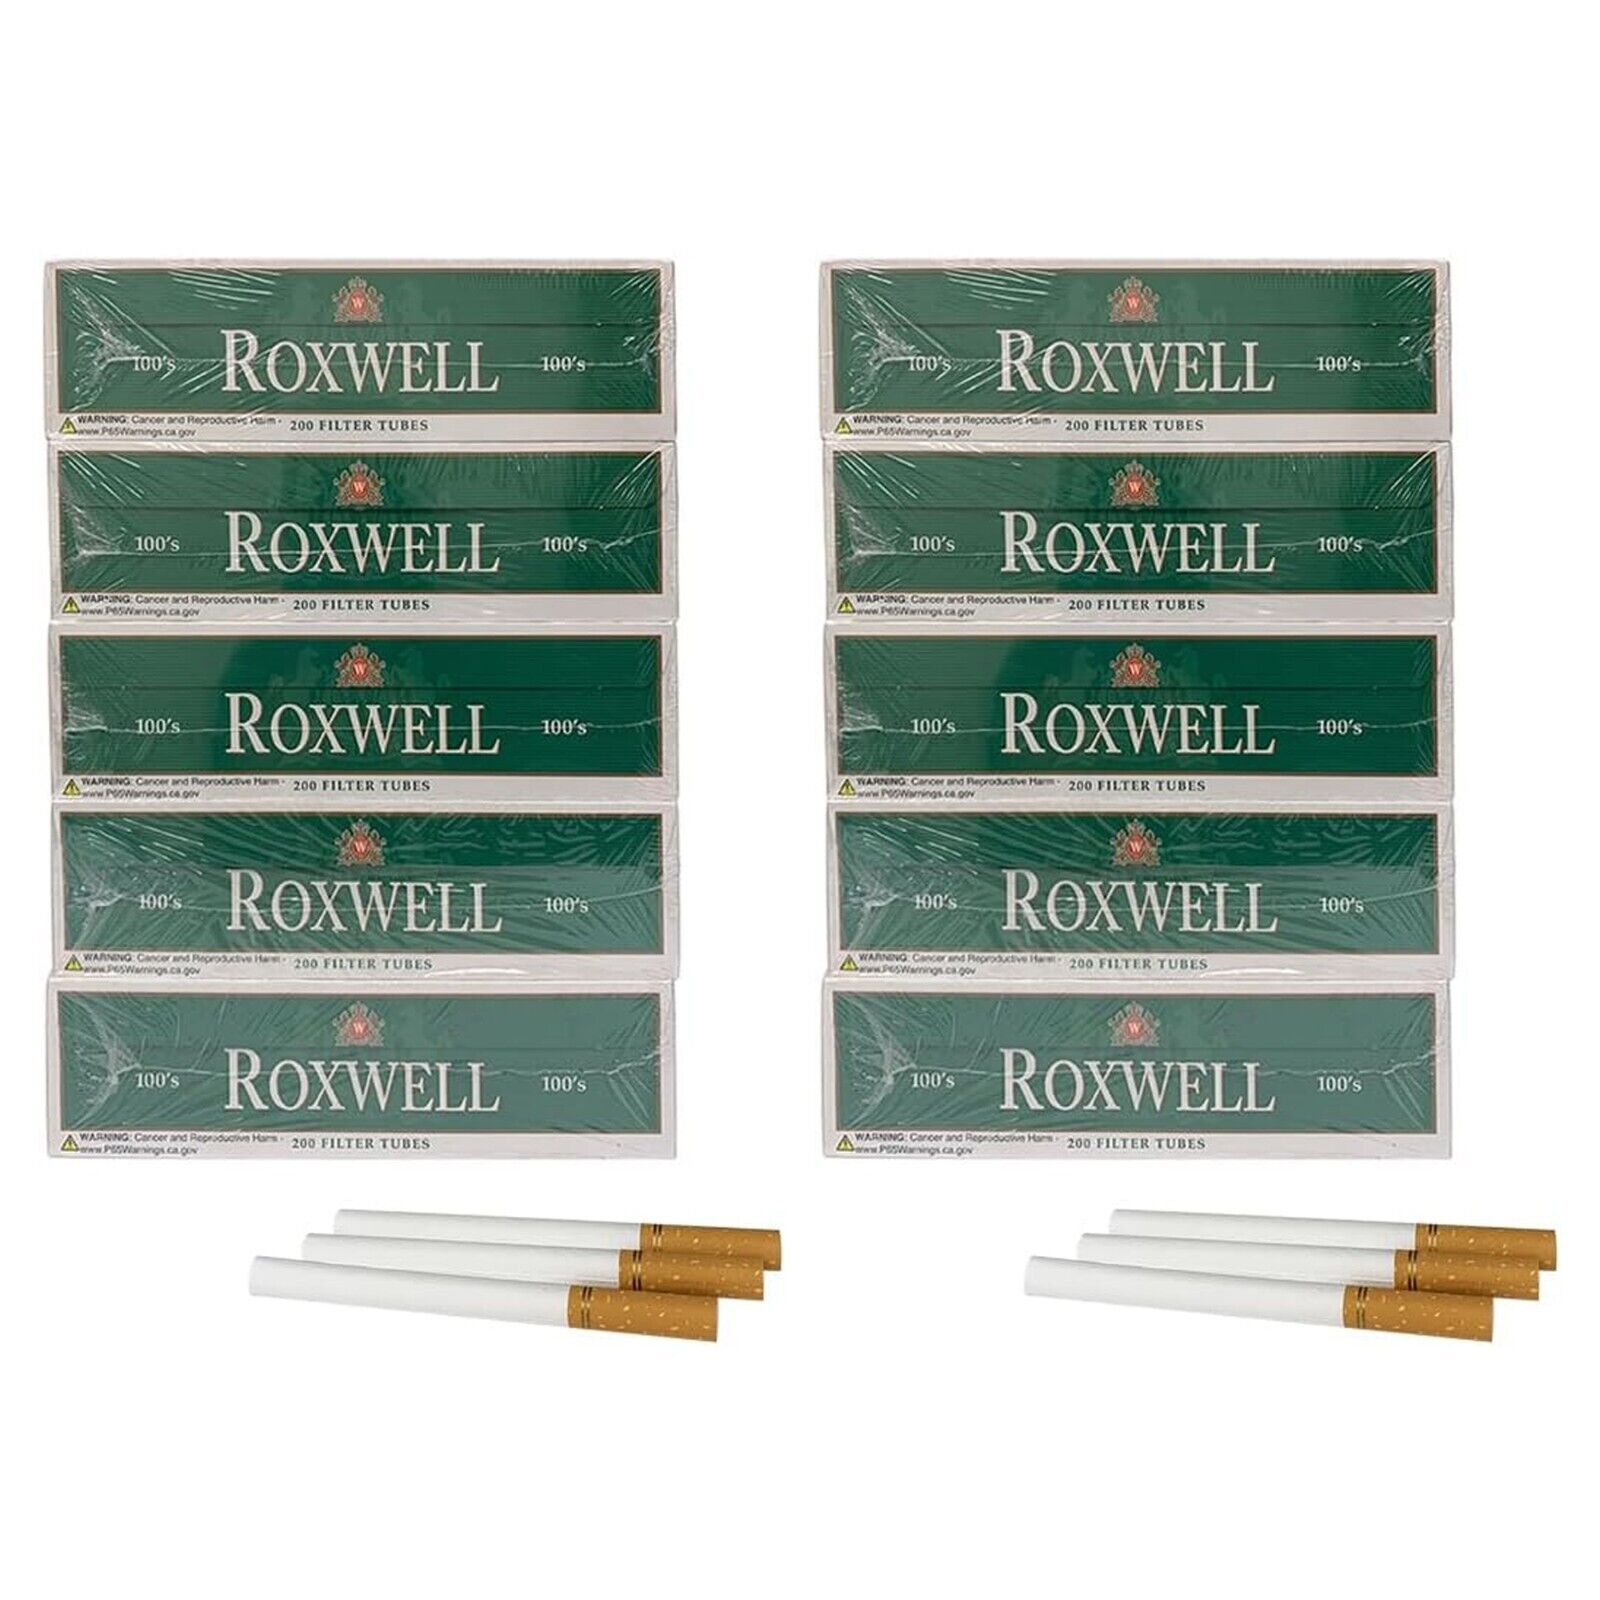 Roxwell Pre-Roll Tubes 100mm Green Menthol Cigarette Tubes 10 Pack of 200 Count